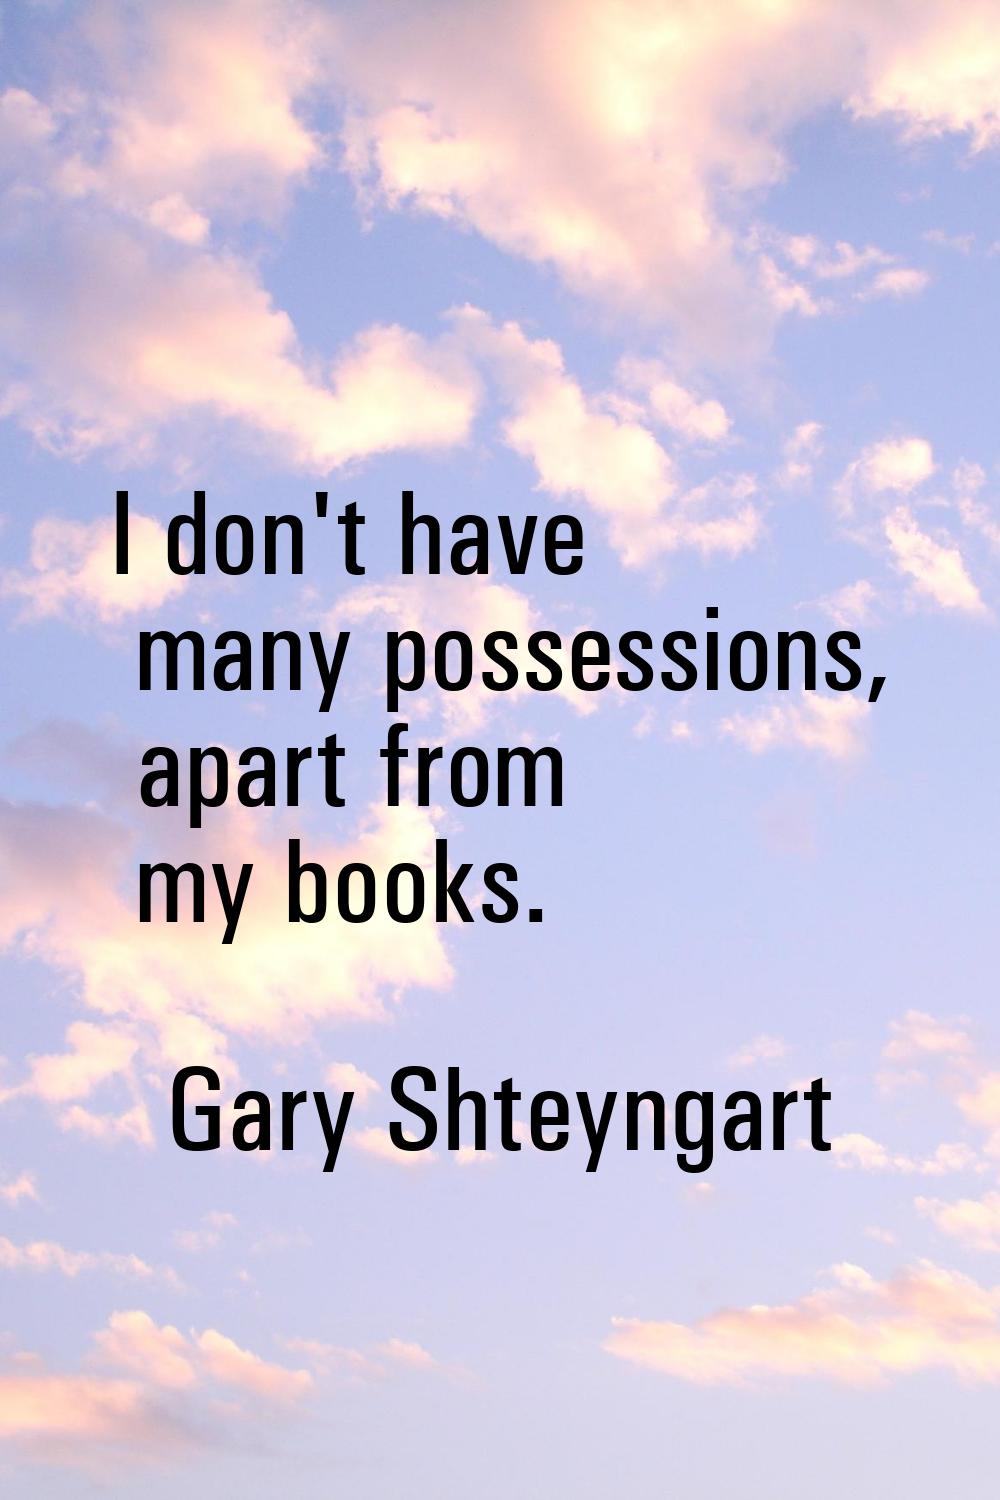 I don't have many possessions, apart from my books.